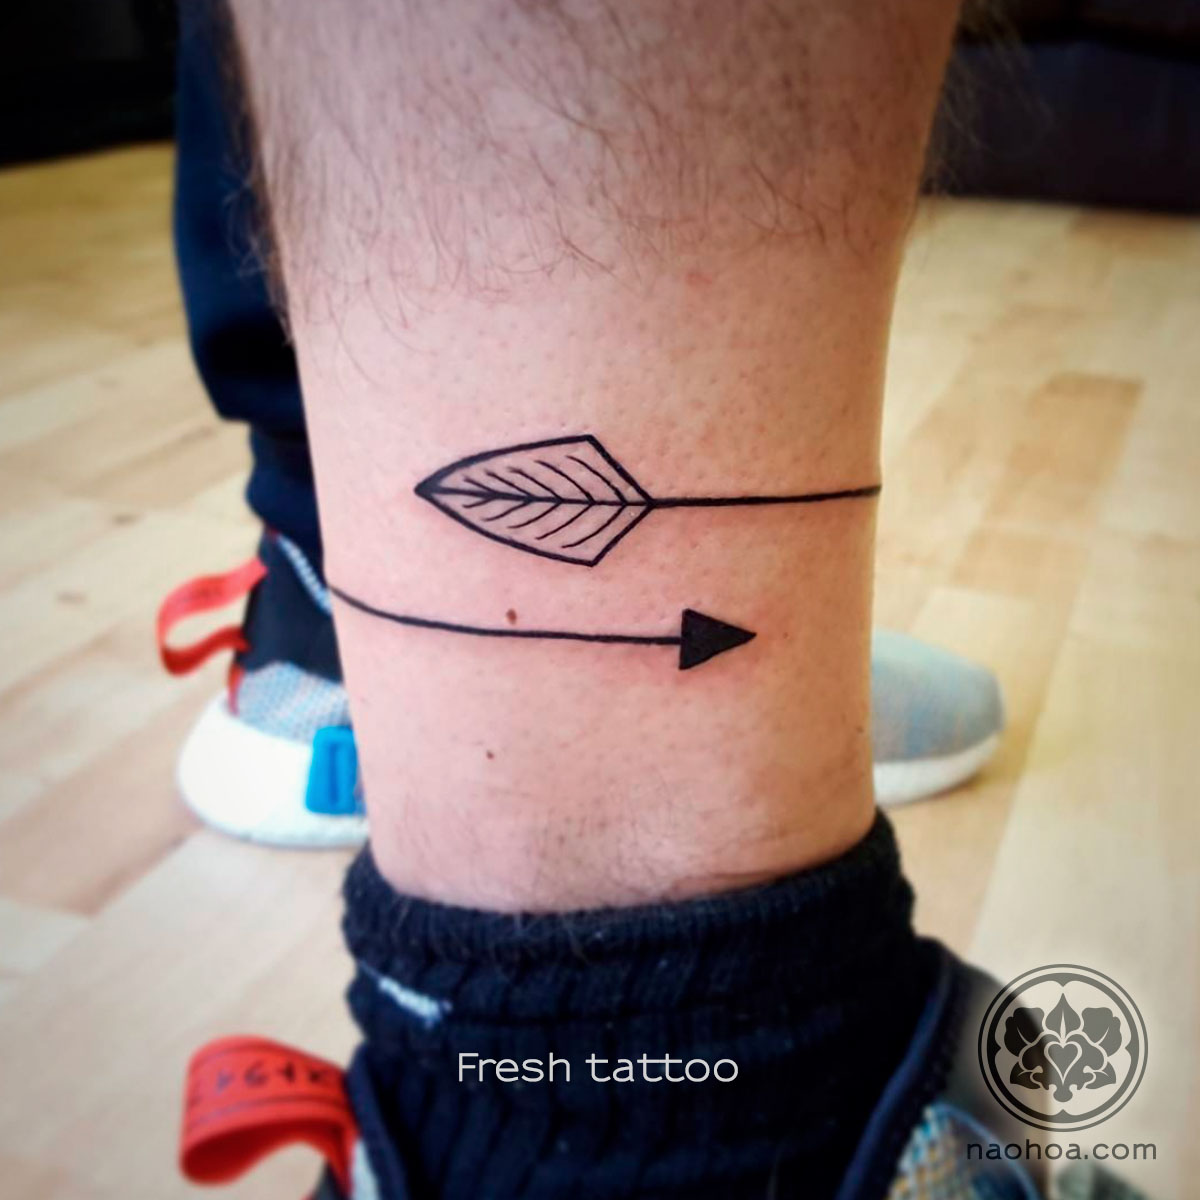 A tattoo of a bold, minimalist arrow that wraps around the client's leg. Designed and tattooed by Naomi Hoang at NAOHOA Luxury Bespoke Tattoos, Cardiff (Wales, UK).